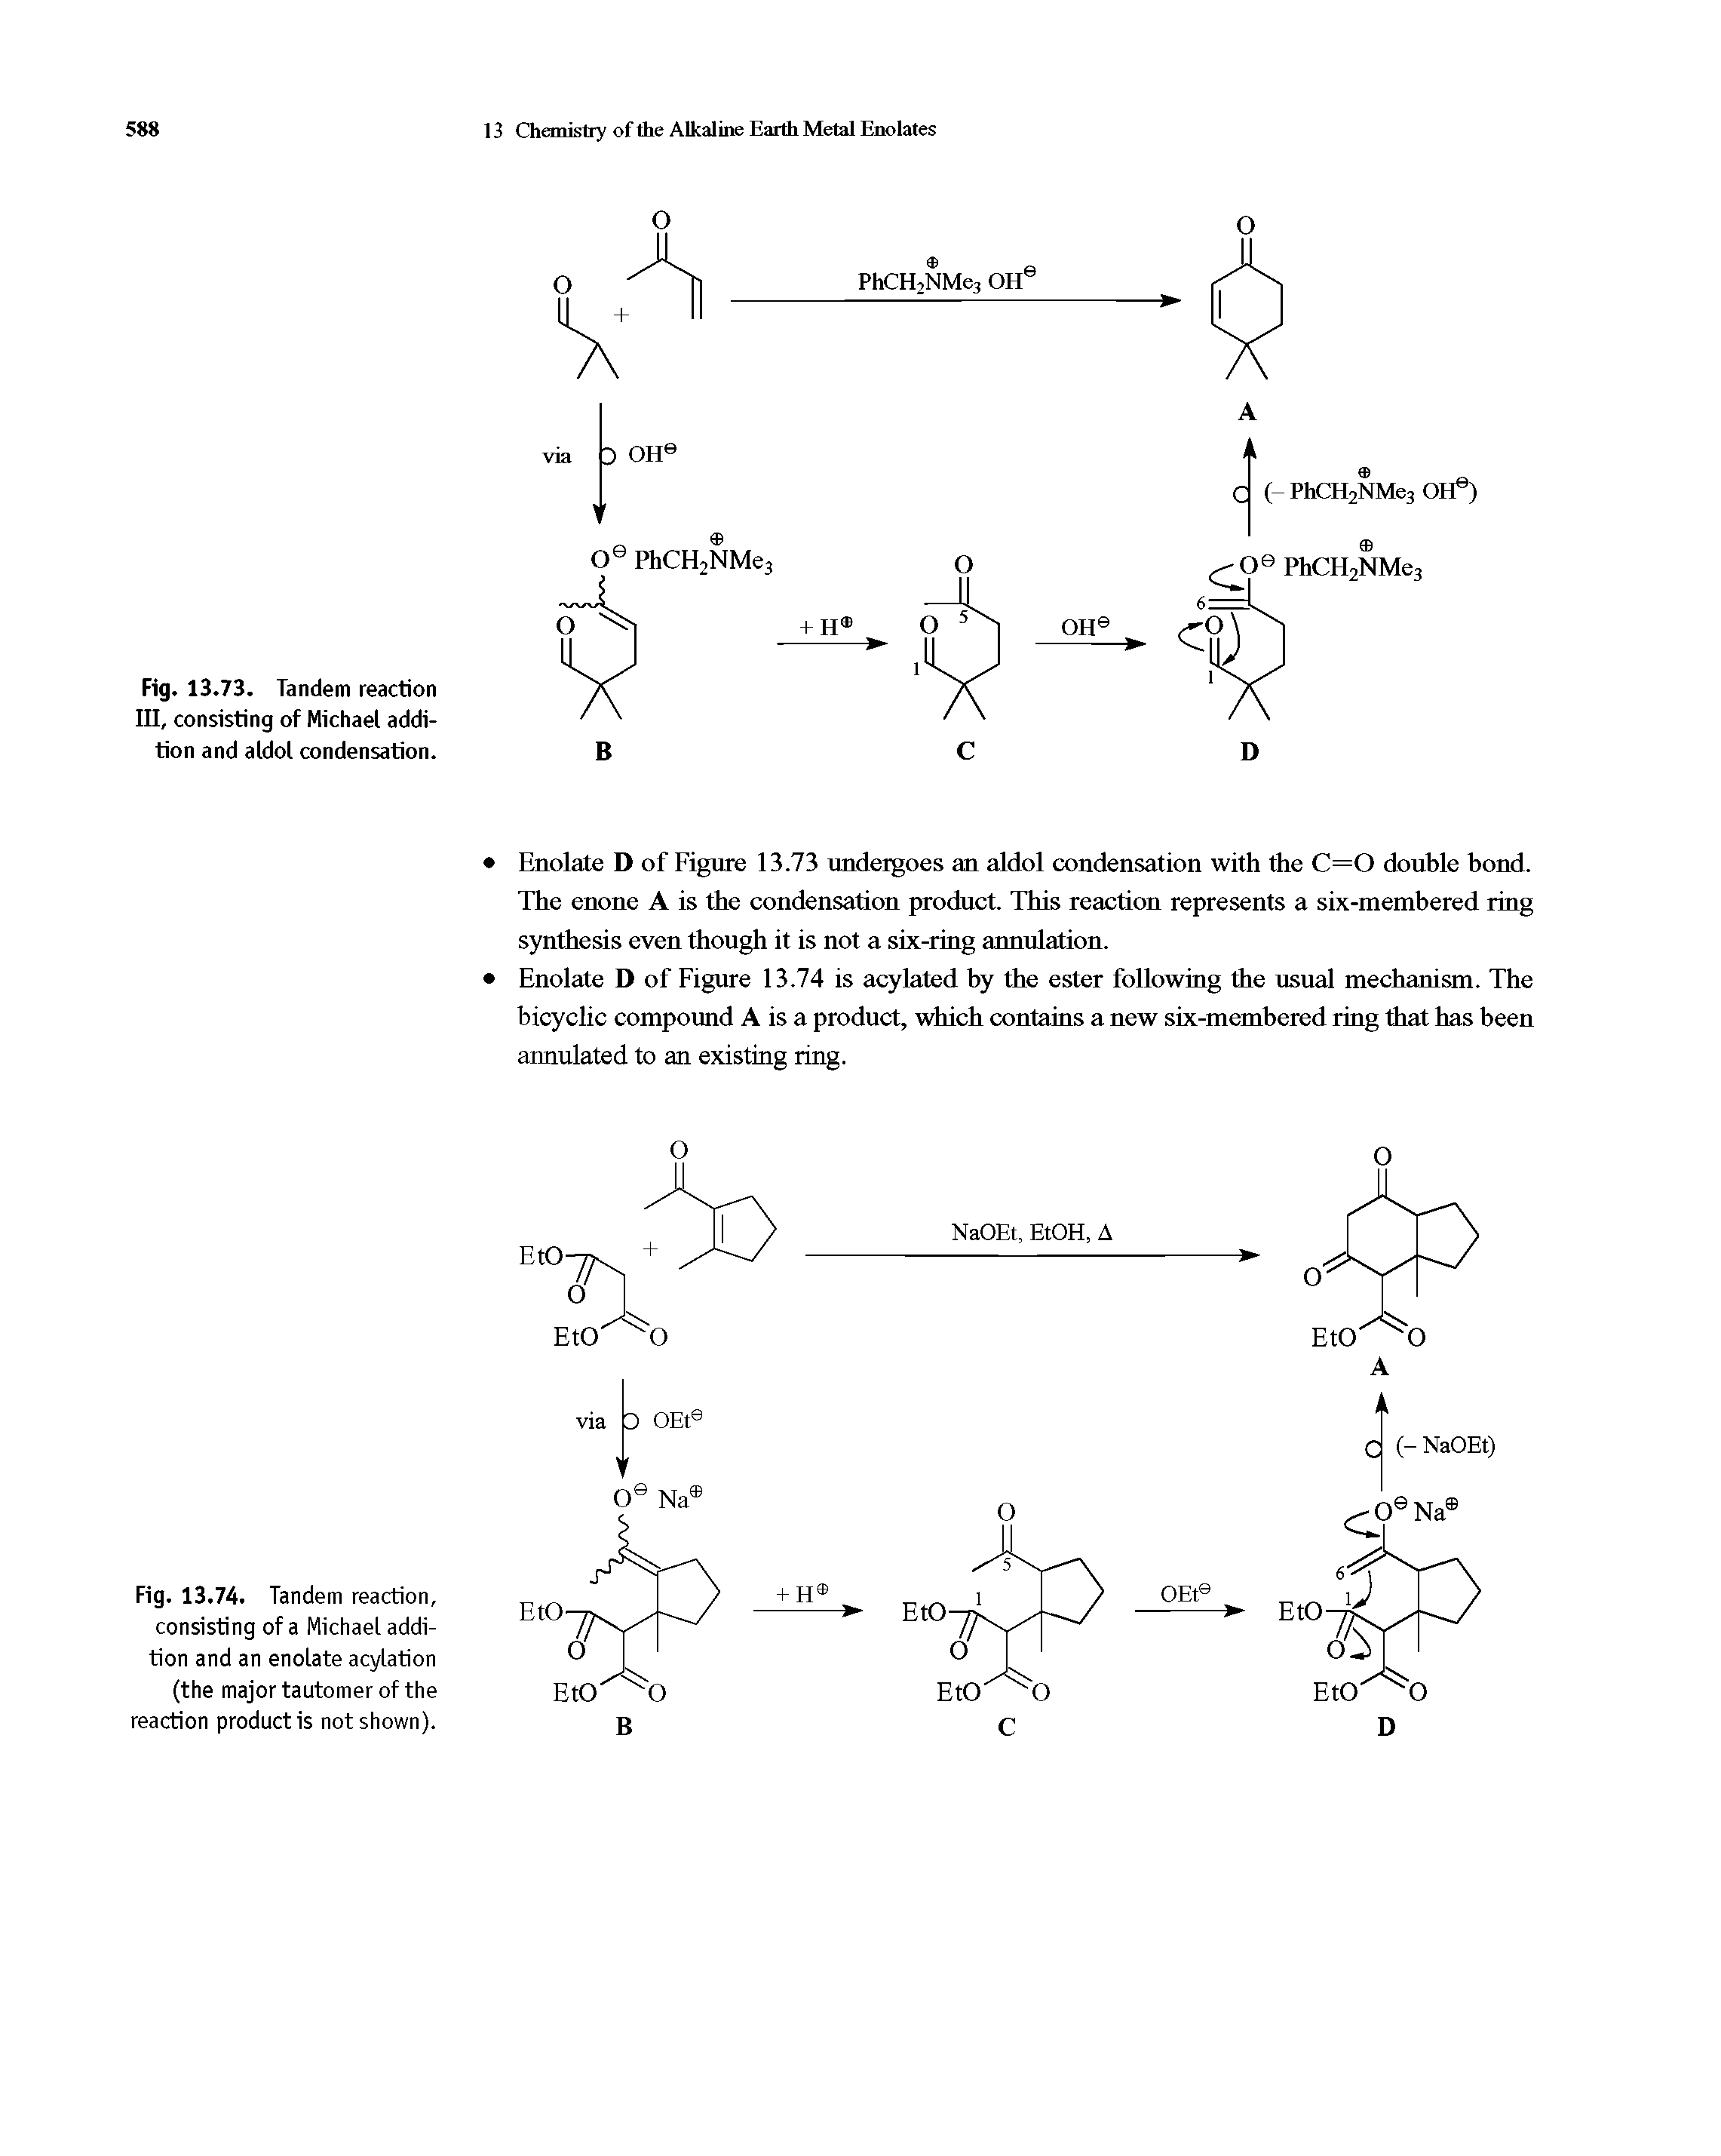 Fig. 13.74. Tandem reaction, consisting of a Michael addition and an enolate acylation (the major tautomer of the reaction product is not shown).